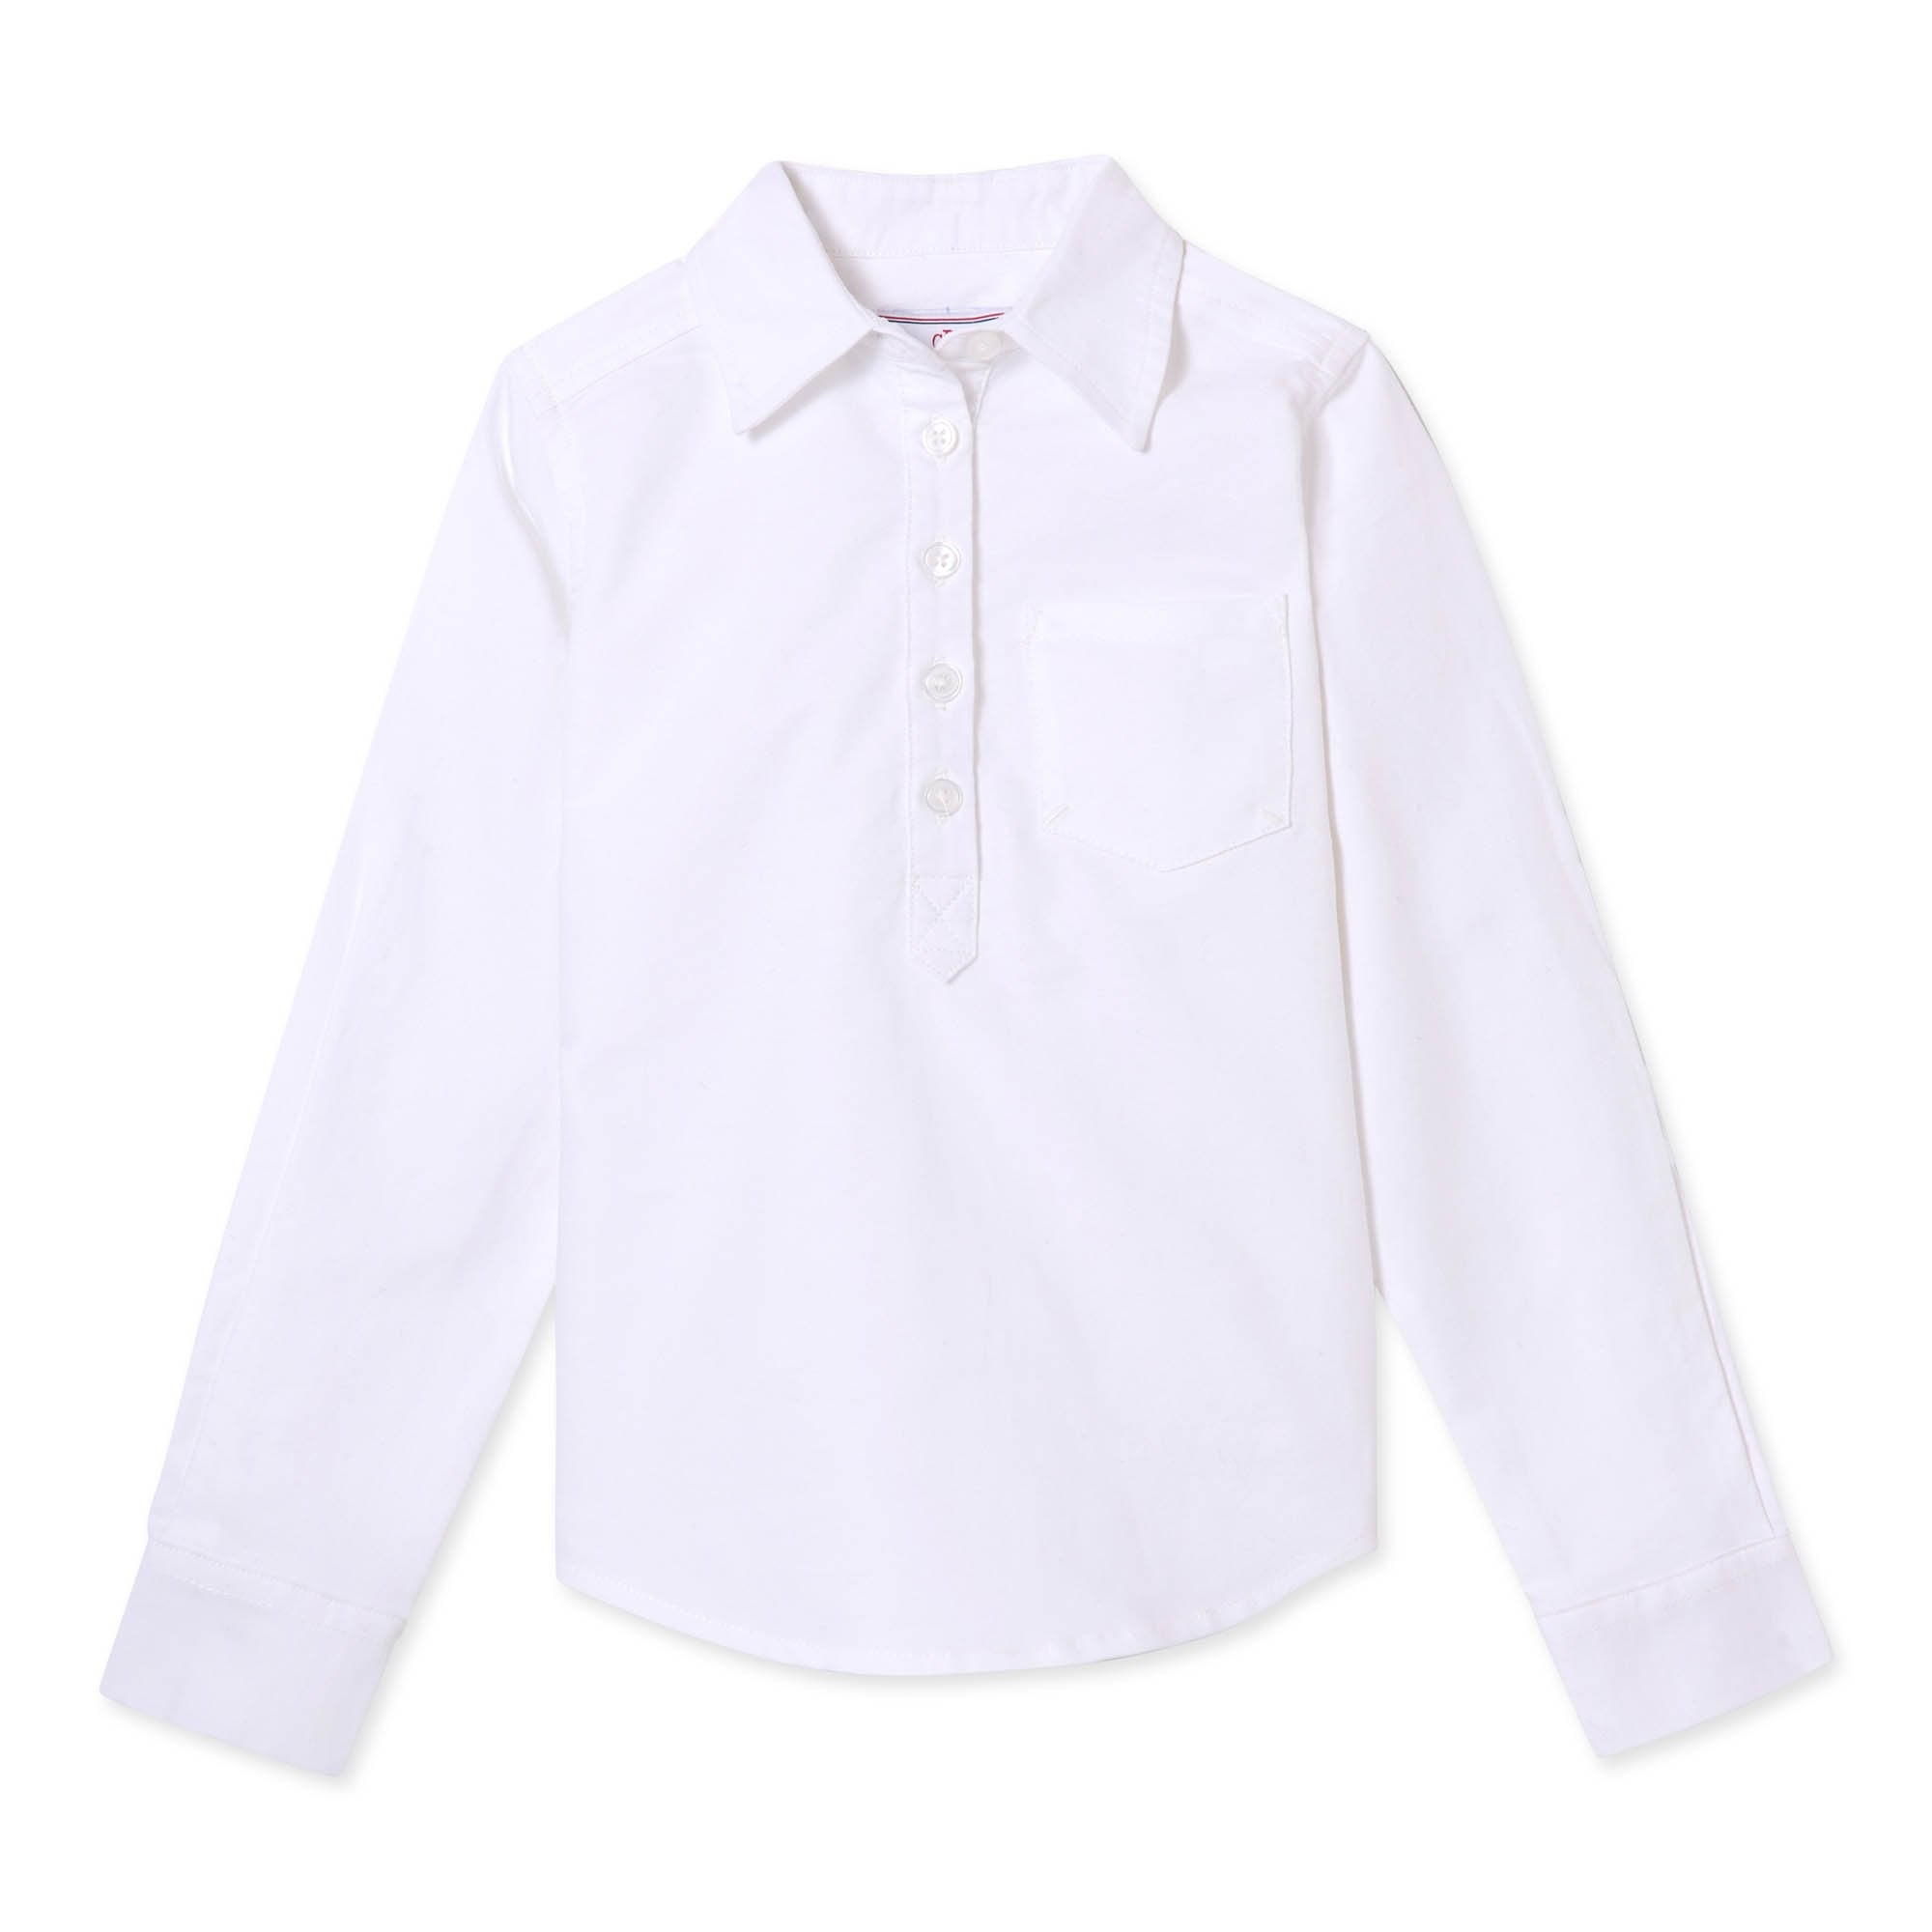 Solid White Oxford / 5Y